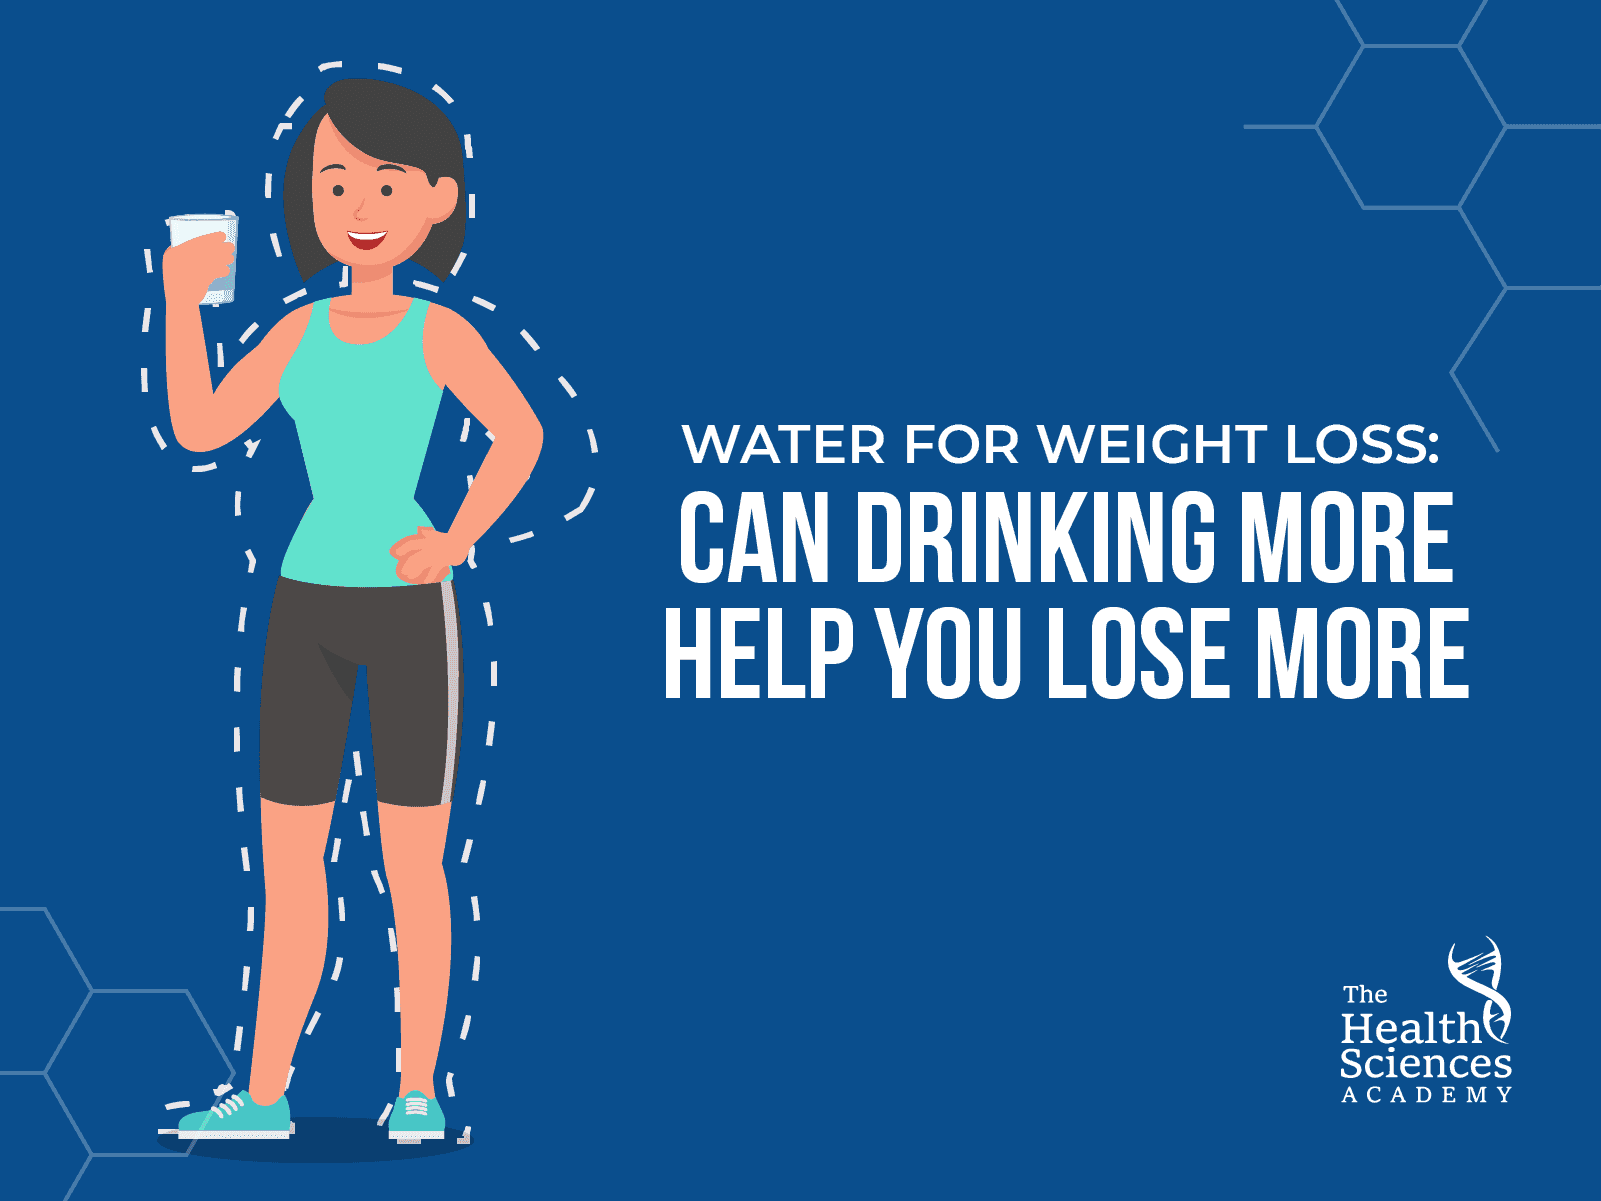 Hydration for weight loss